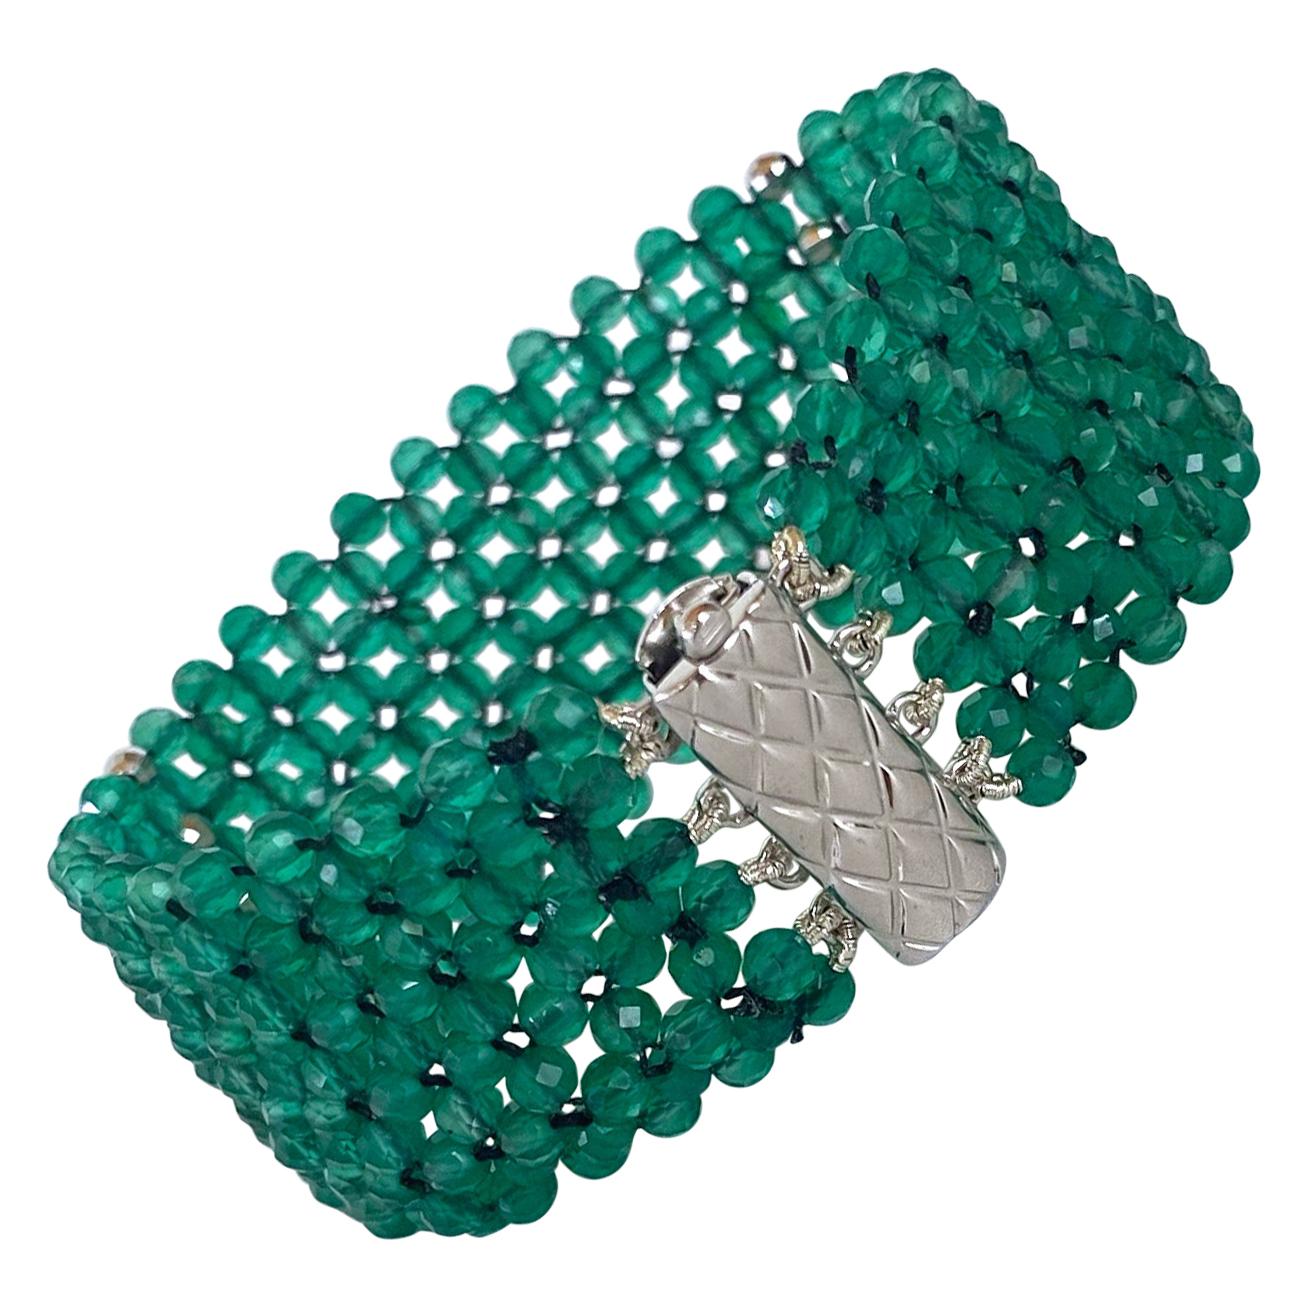 Marina J. Hand Woven Green Onyx beads Bracelet with Rhodium Plated  Silver clasp